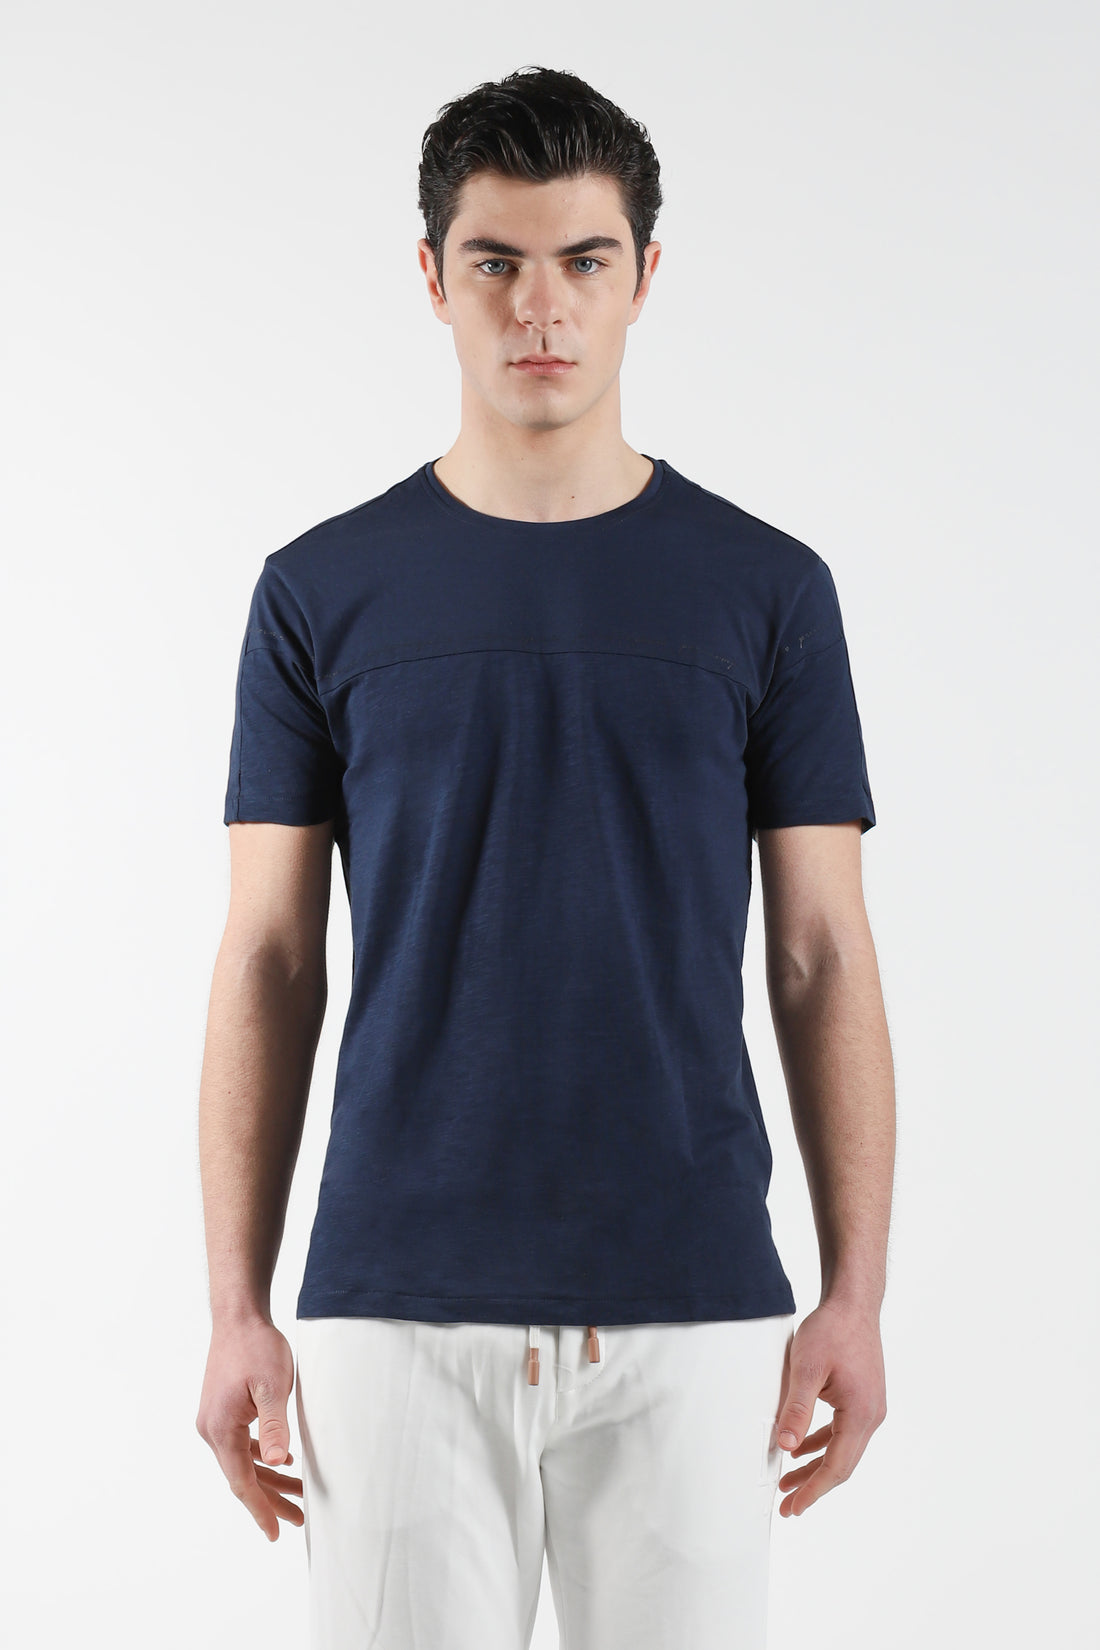 Round neck T-Shirt with color on color print - Blue